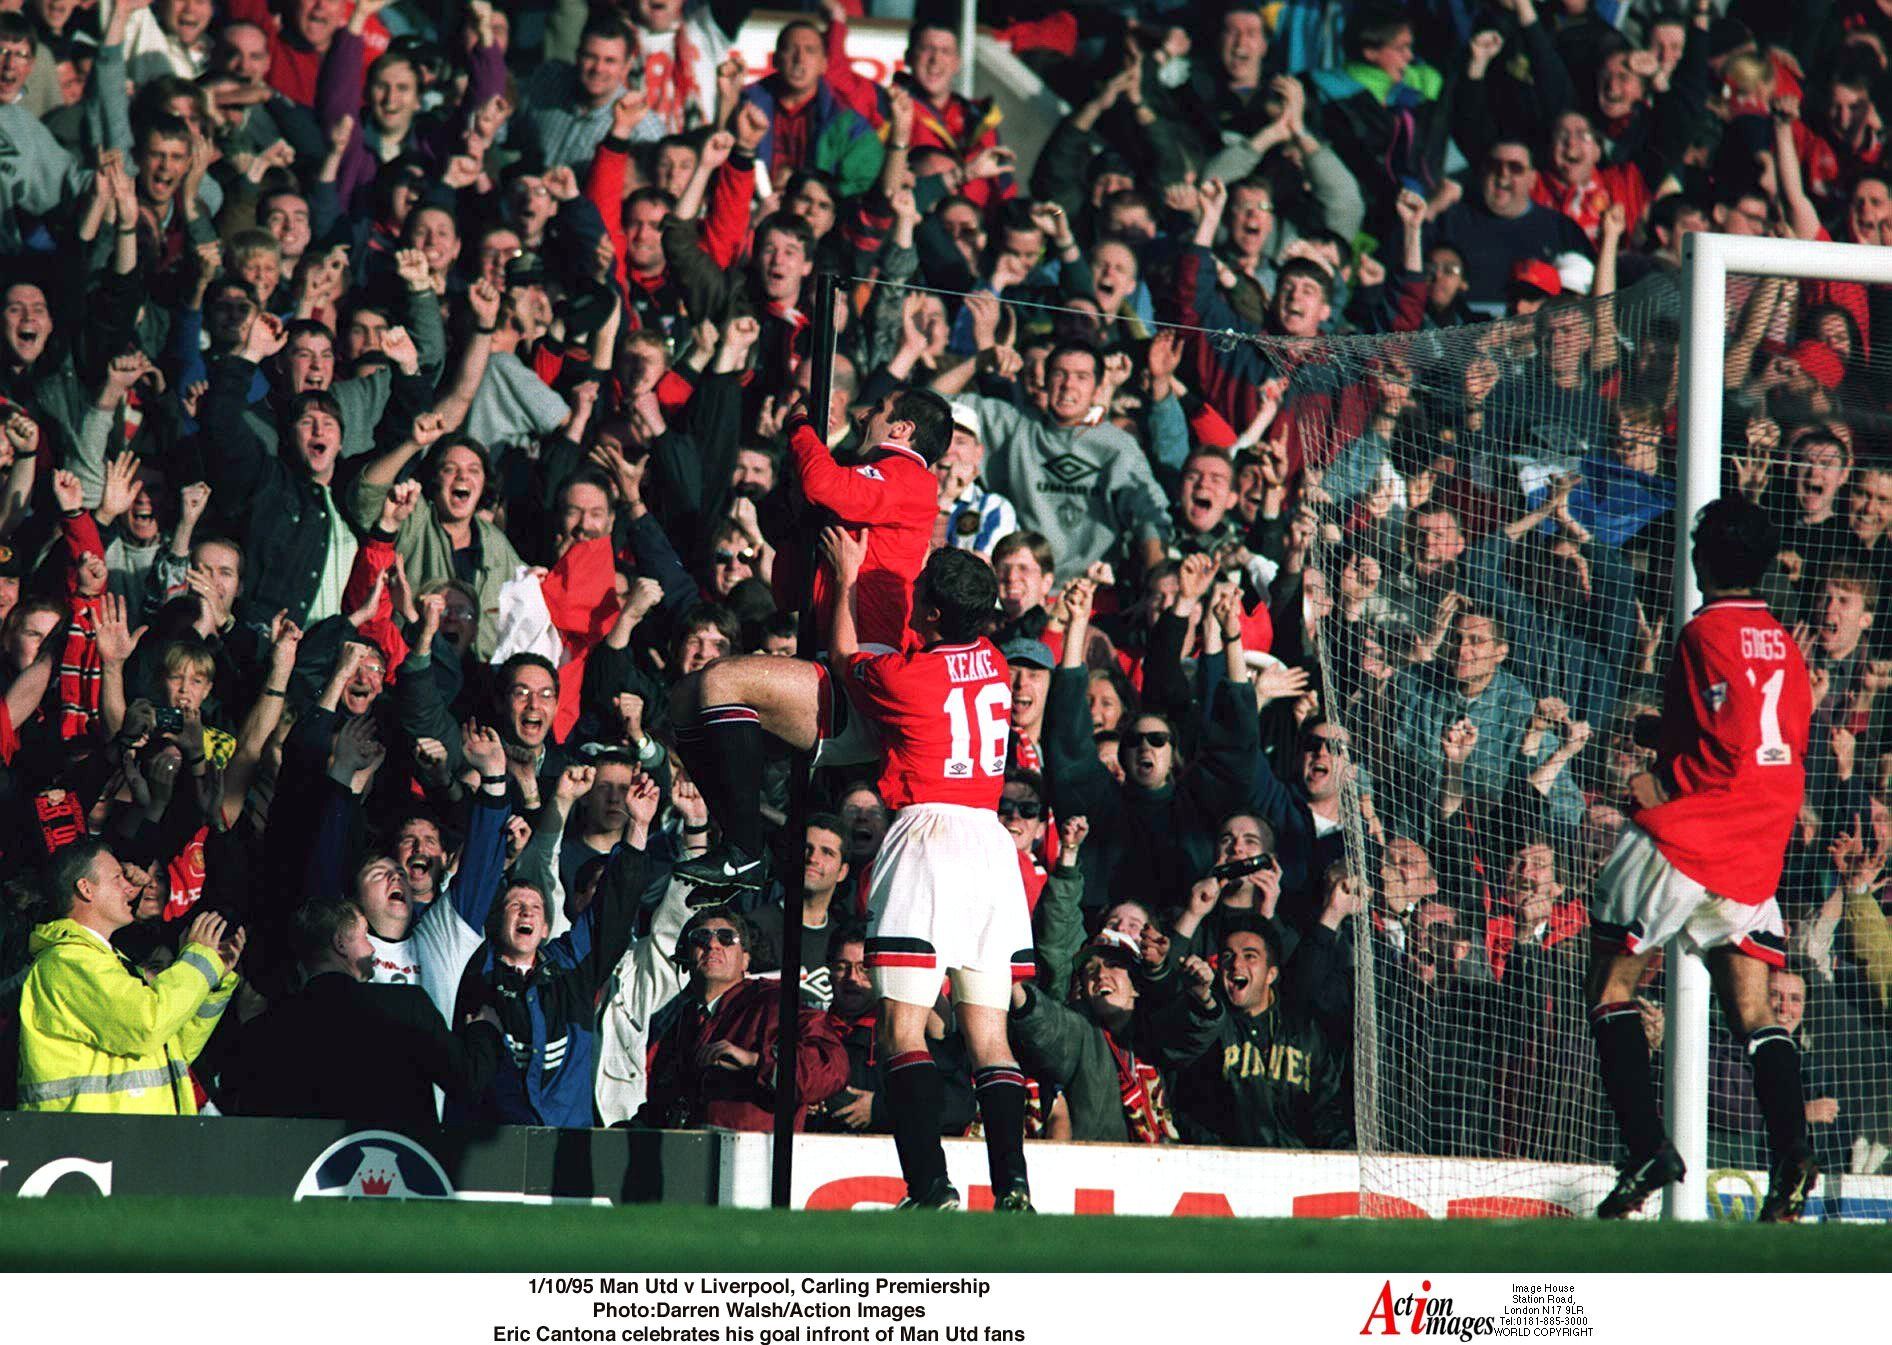 1/10/95 Manchester United v Liverpool, Carling Premiership 
Photo:Darren Walsh/Action Images 
Eric Cantona celebrates his goal infront of Manchester United fans 
Manchester United